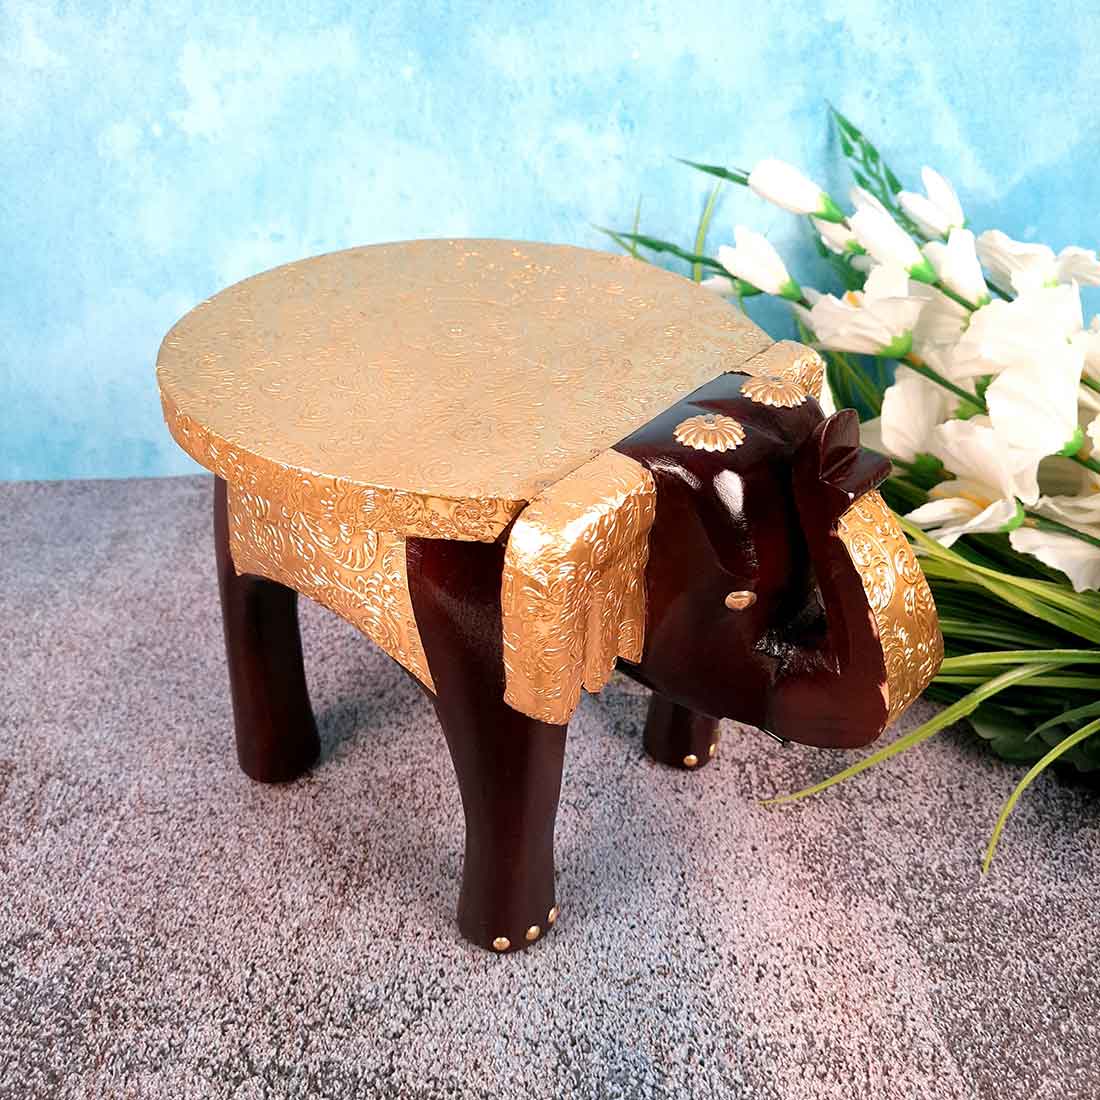 Elephant Showpiece - Small Stool - For Home Decor & Gifts - 8 Inch- Apkamart